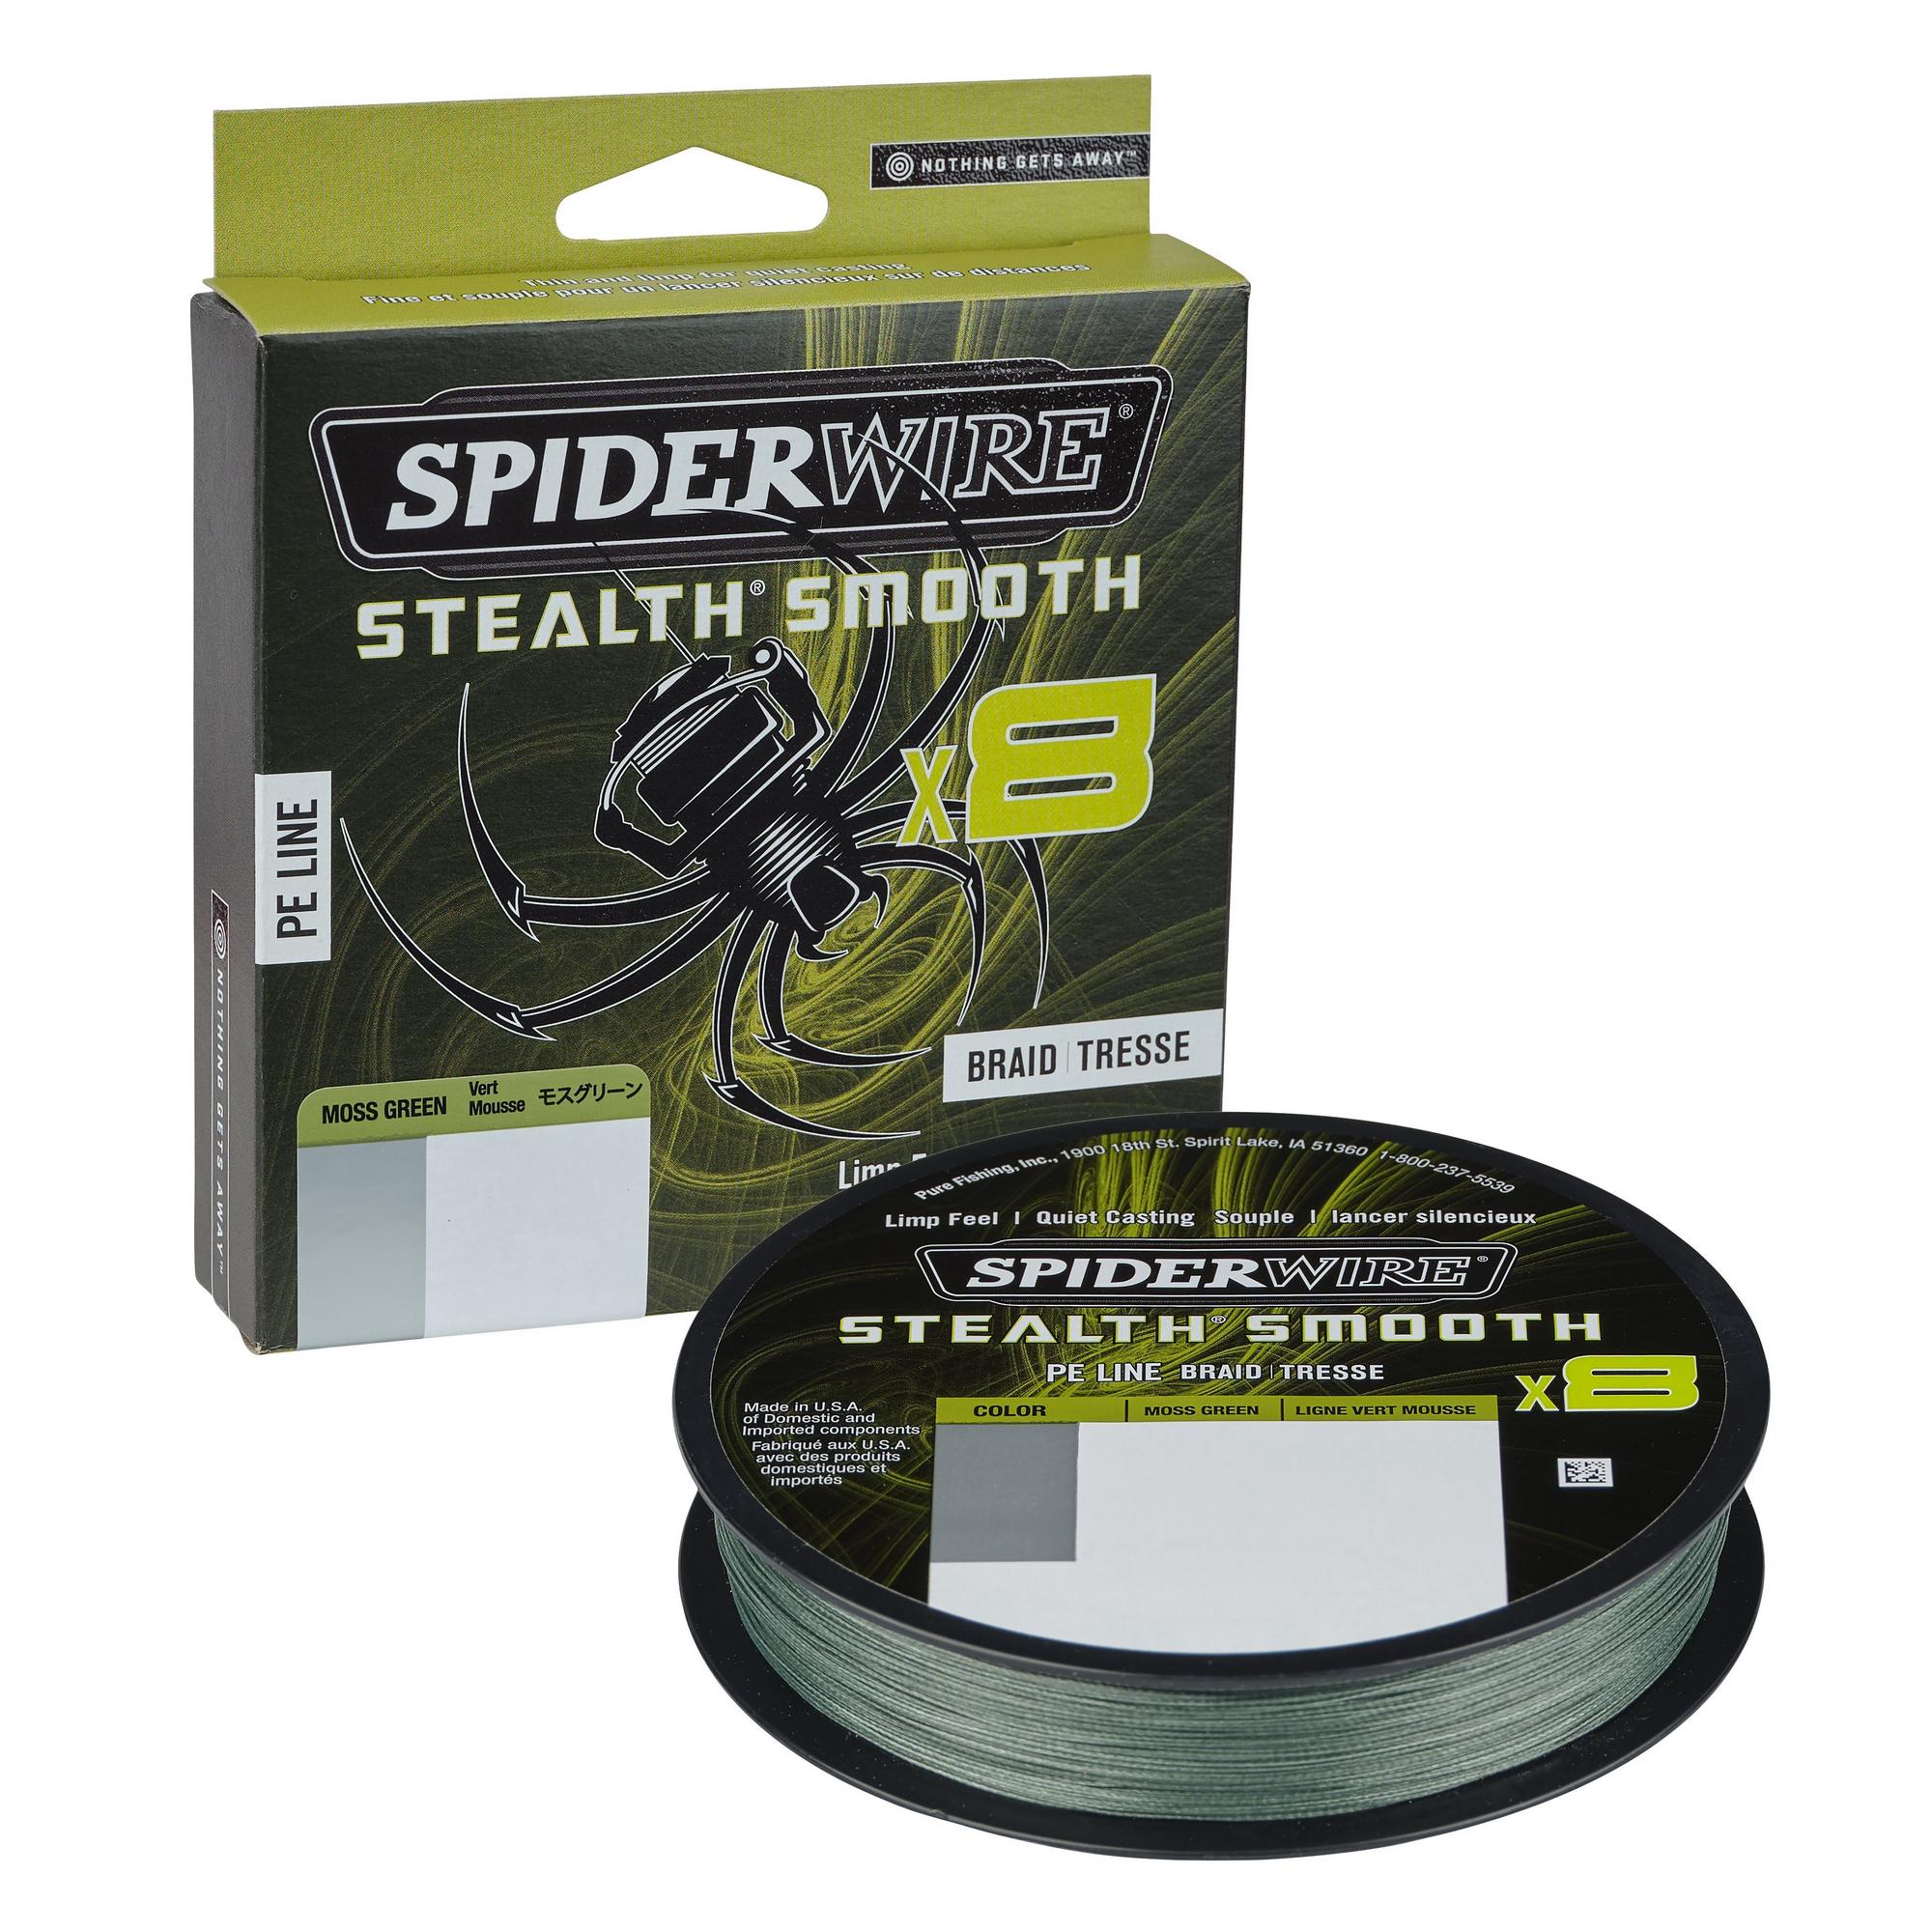 Spiderwire Stealth Smooth 8 Moss Green Braided Line (300m)